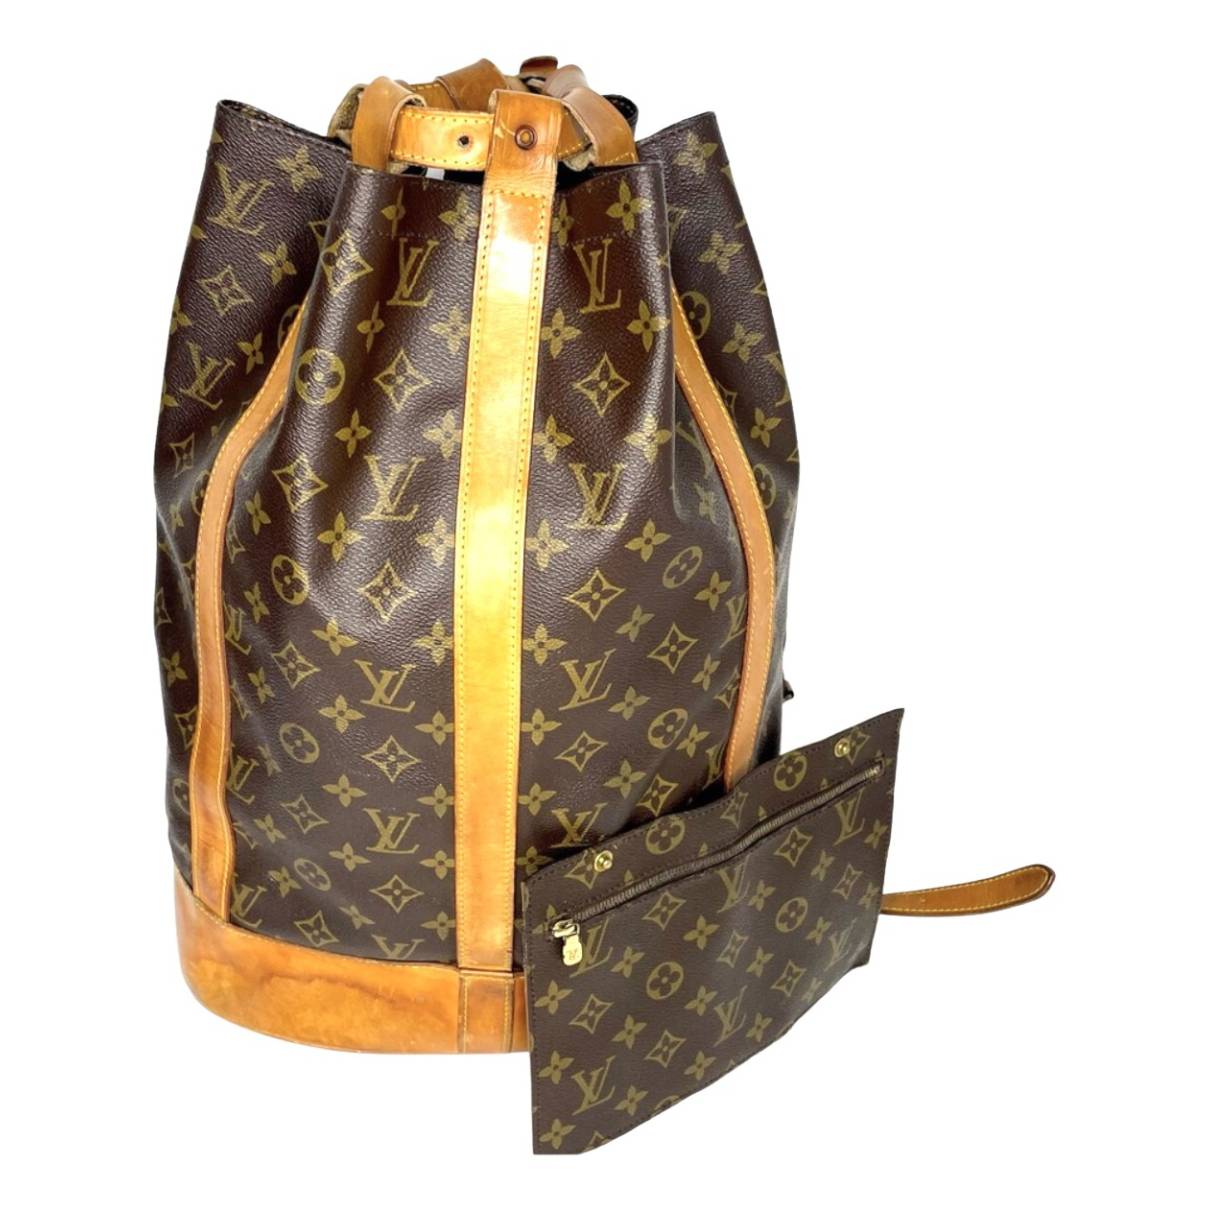 Randonnée patent leather backpack Louis Vuitton Brown in Patent